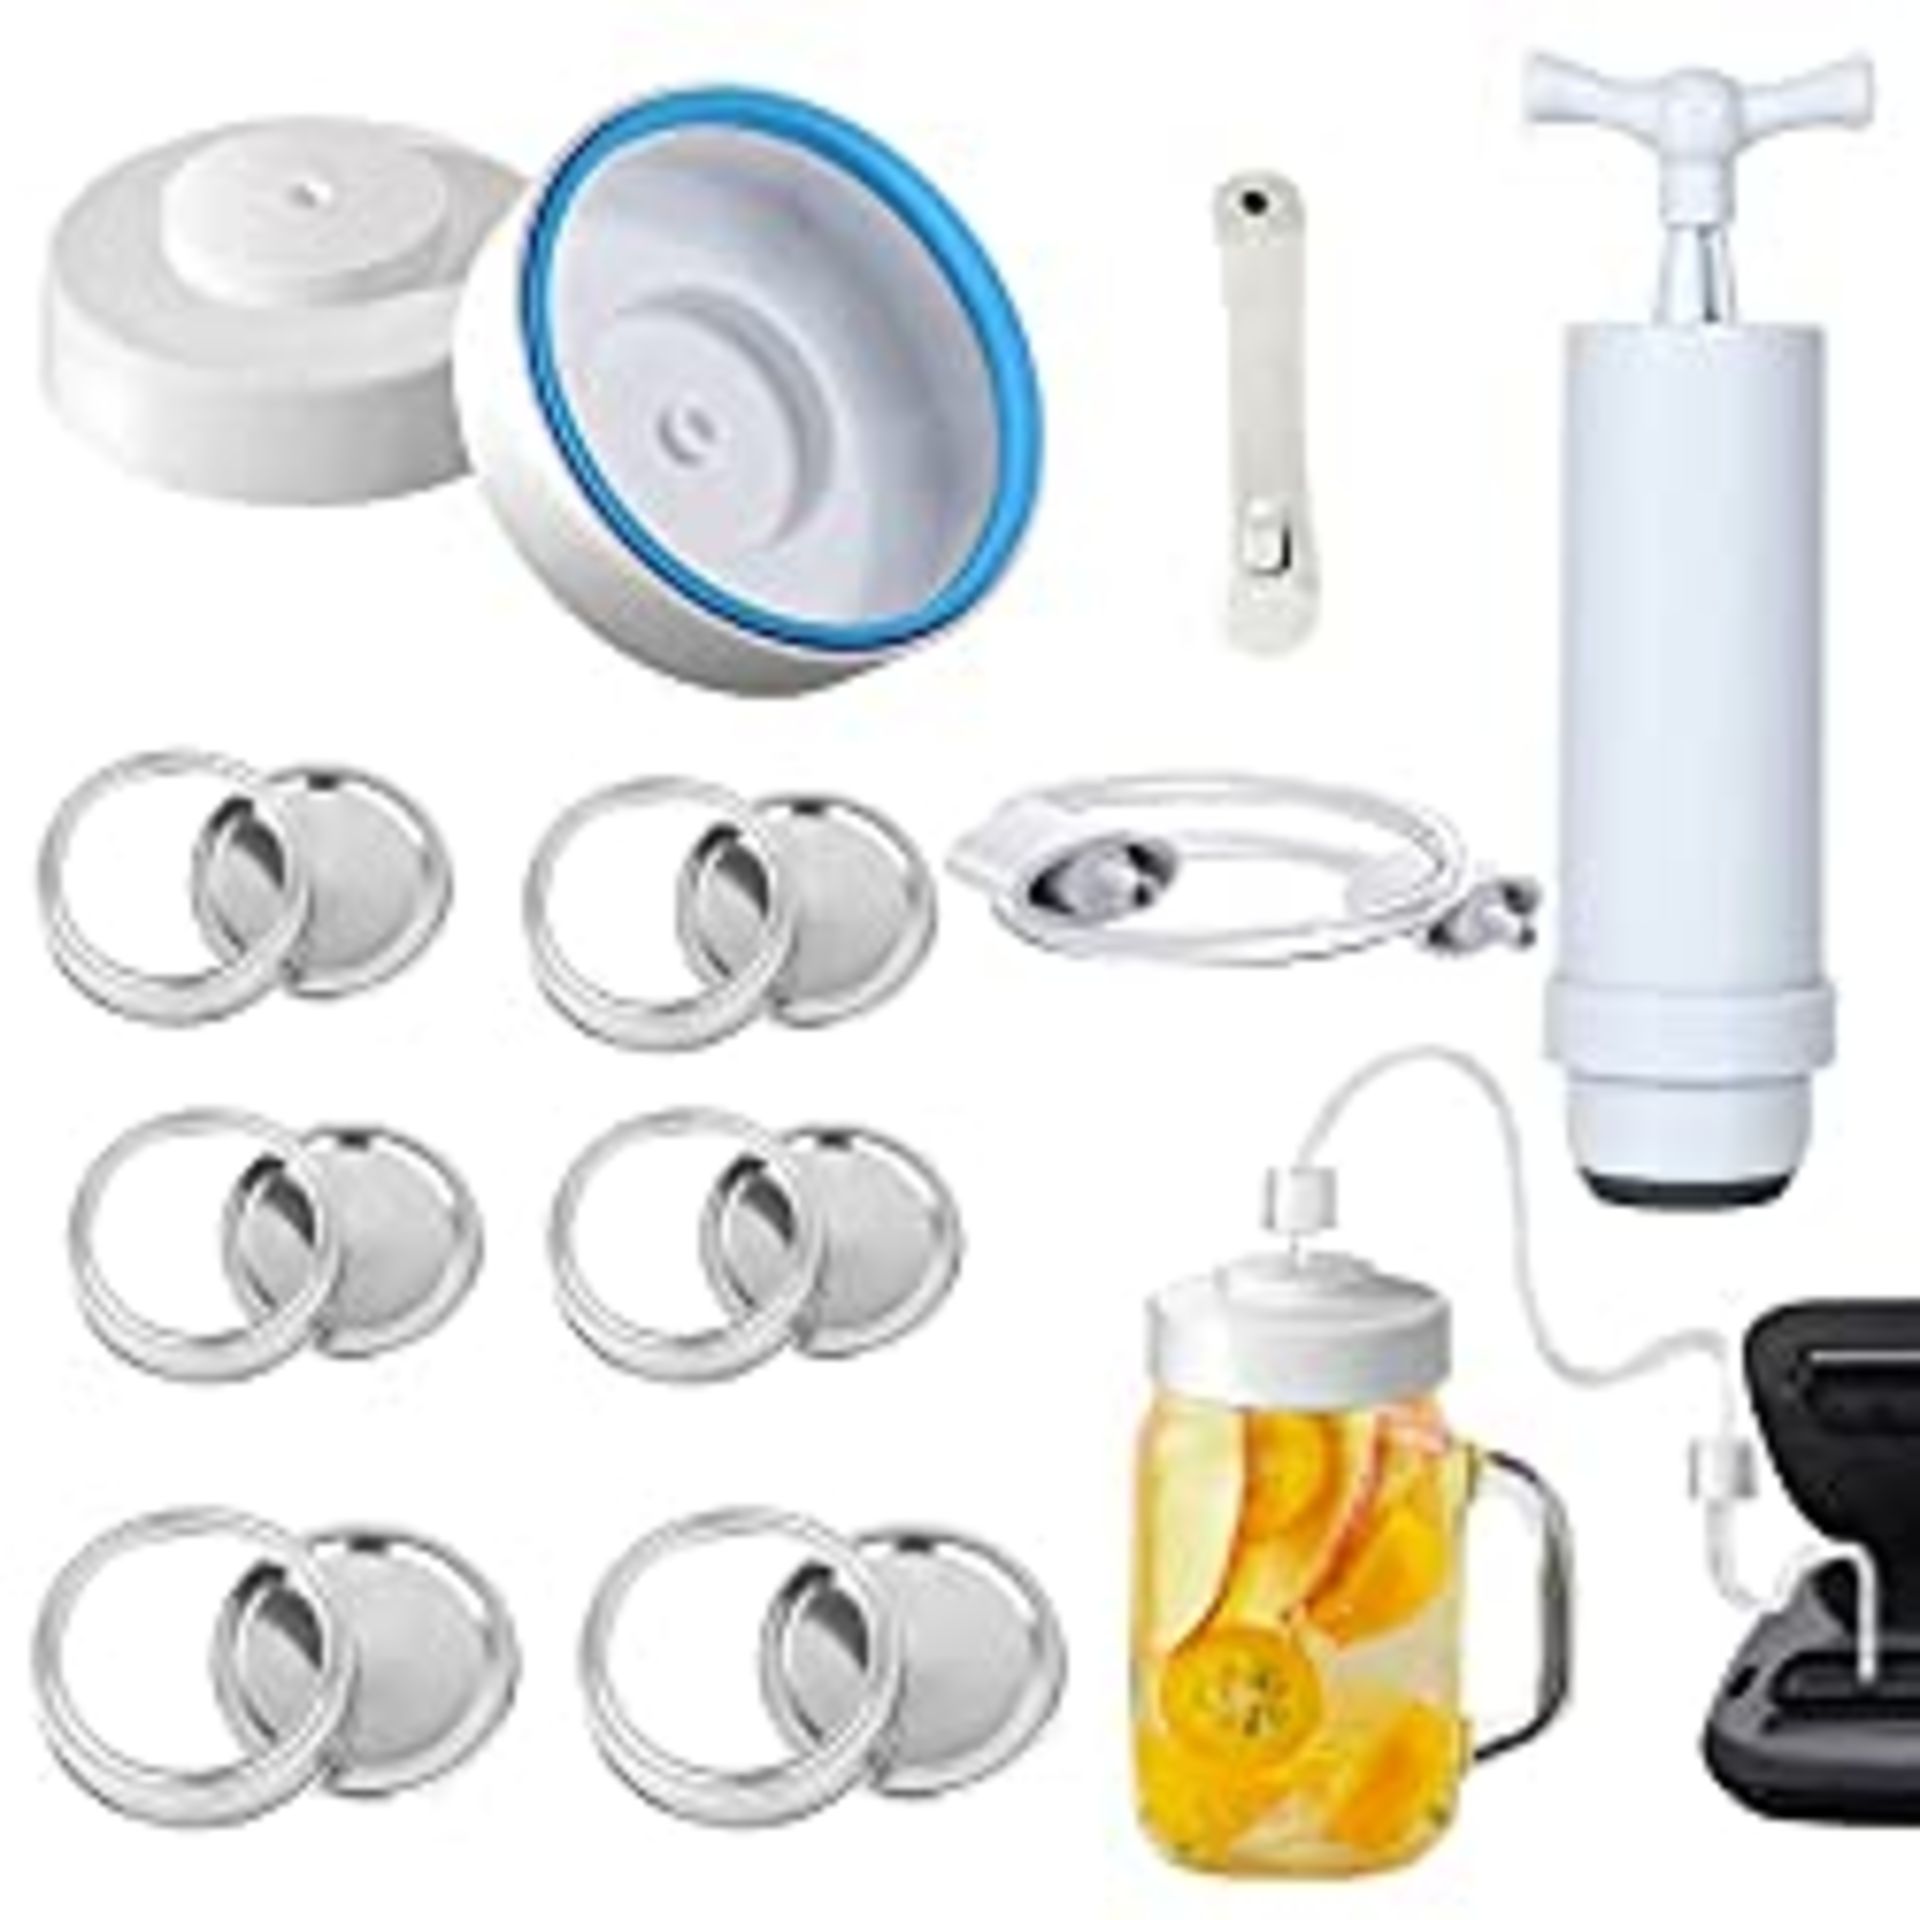 RRP £438.17 Total, Lot Consisting of 40 Items - See Description. - Image 8 of 29